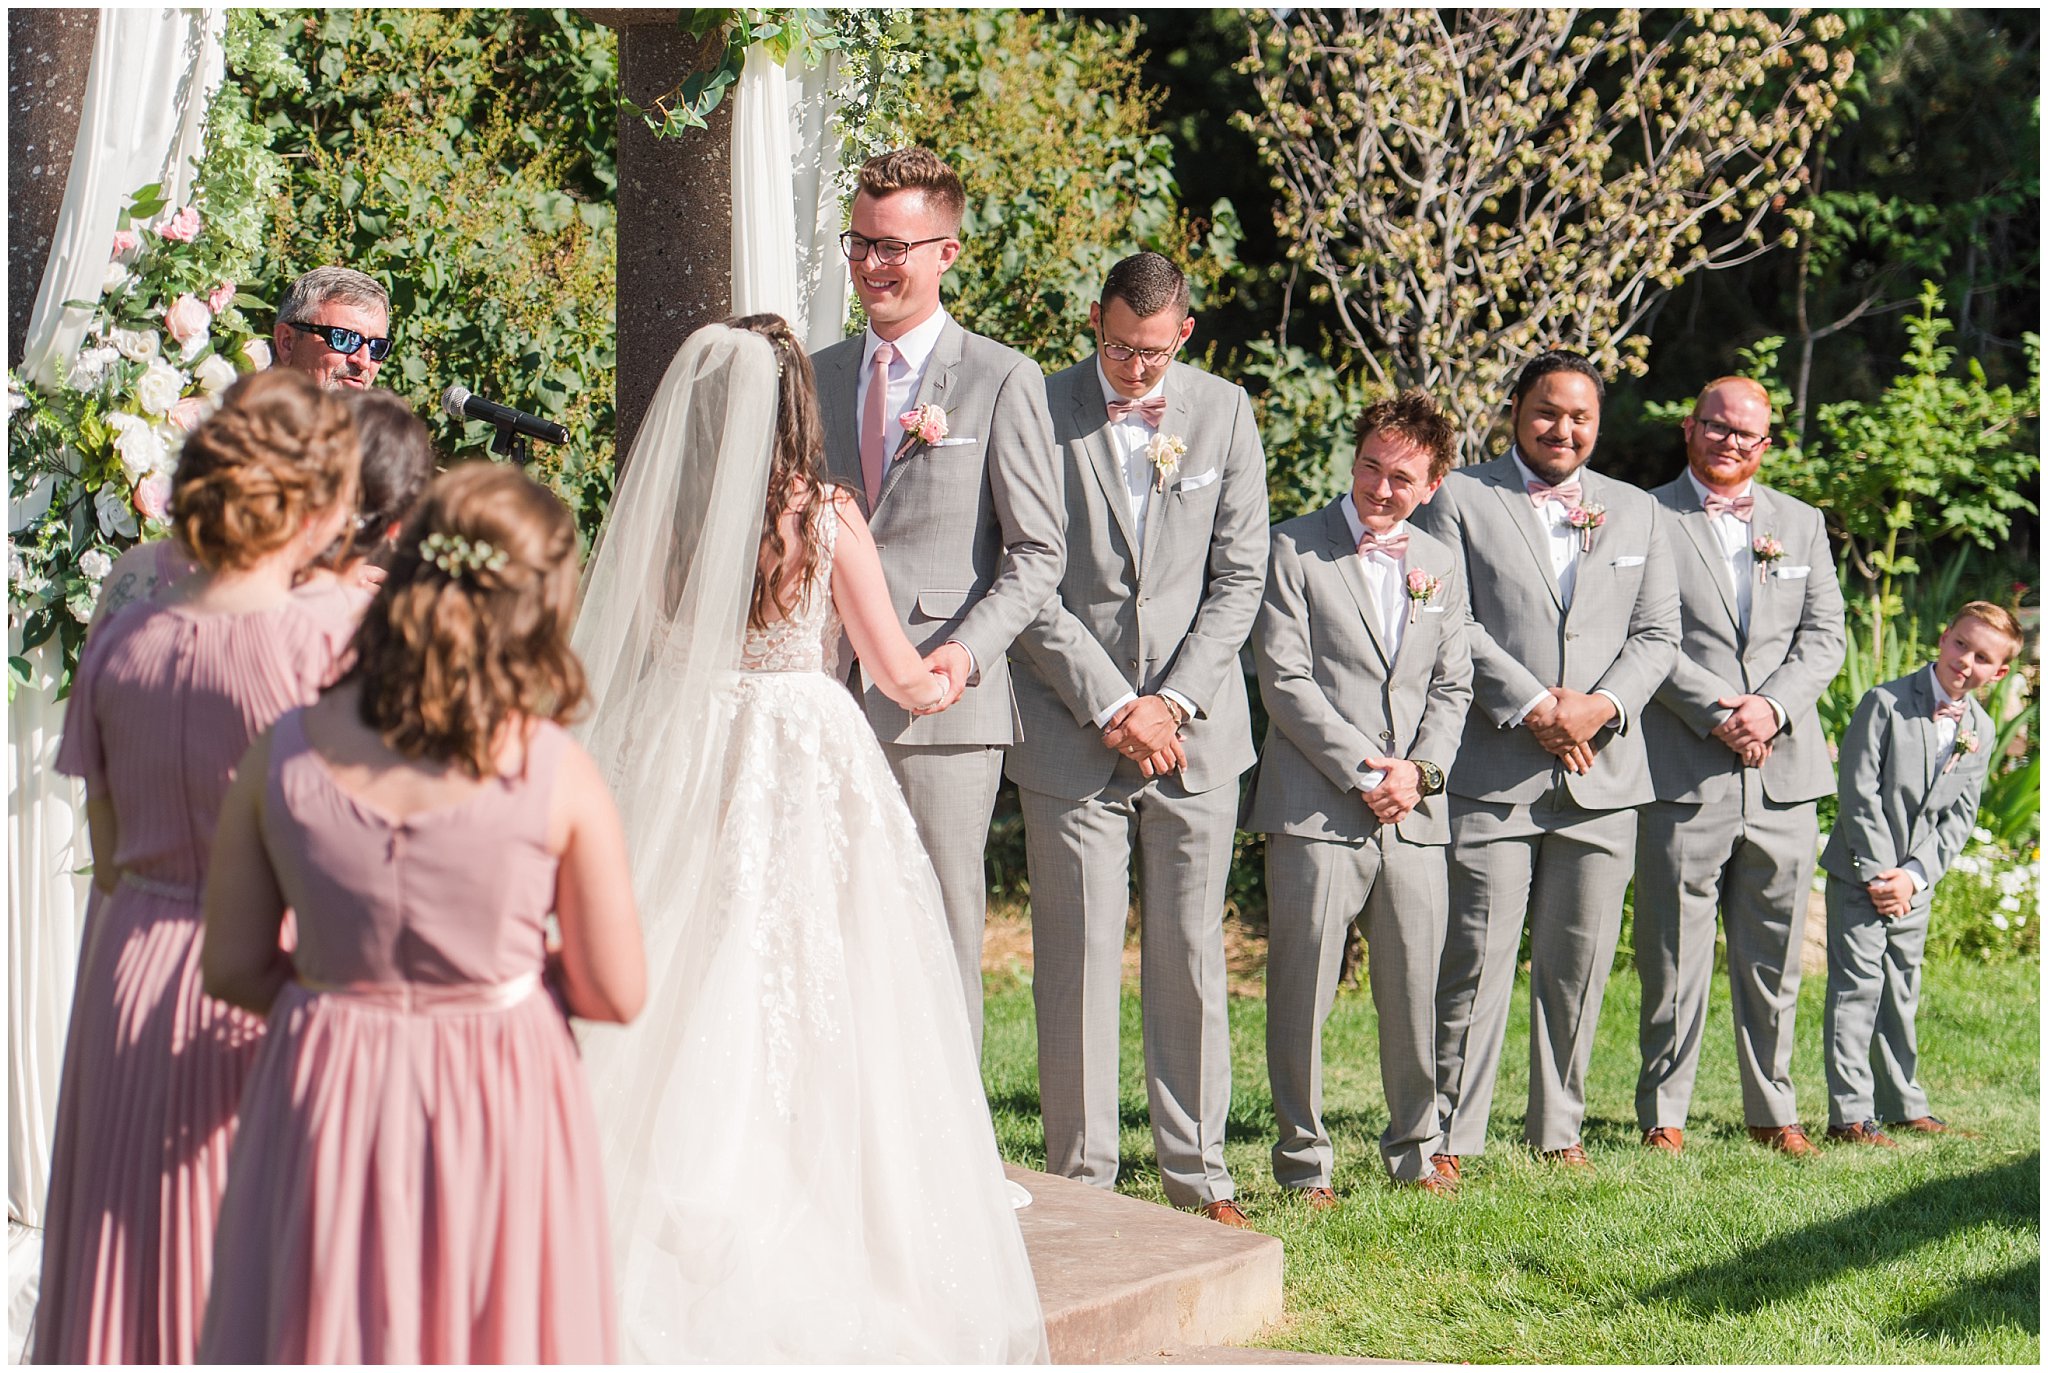 Wedding party during ceremony | Oak Hills Utah Dusty Rose and Gray Summer Wedding | Jessie and Dallin Photography